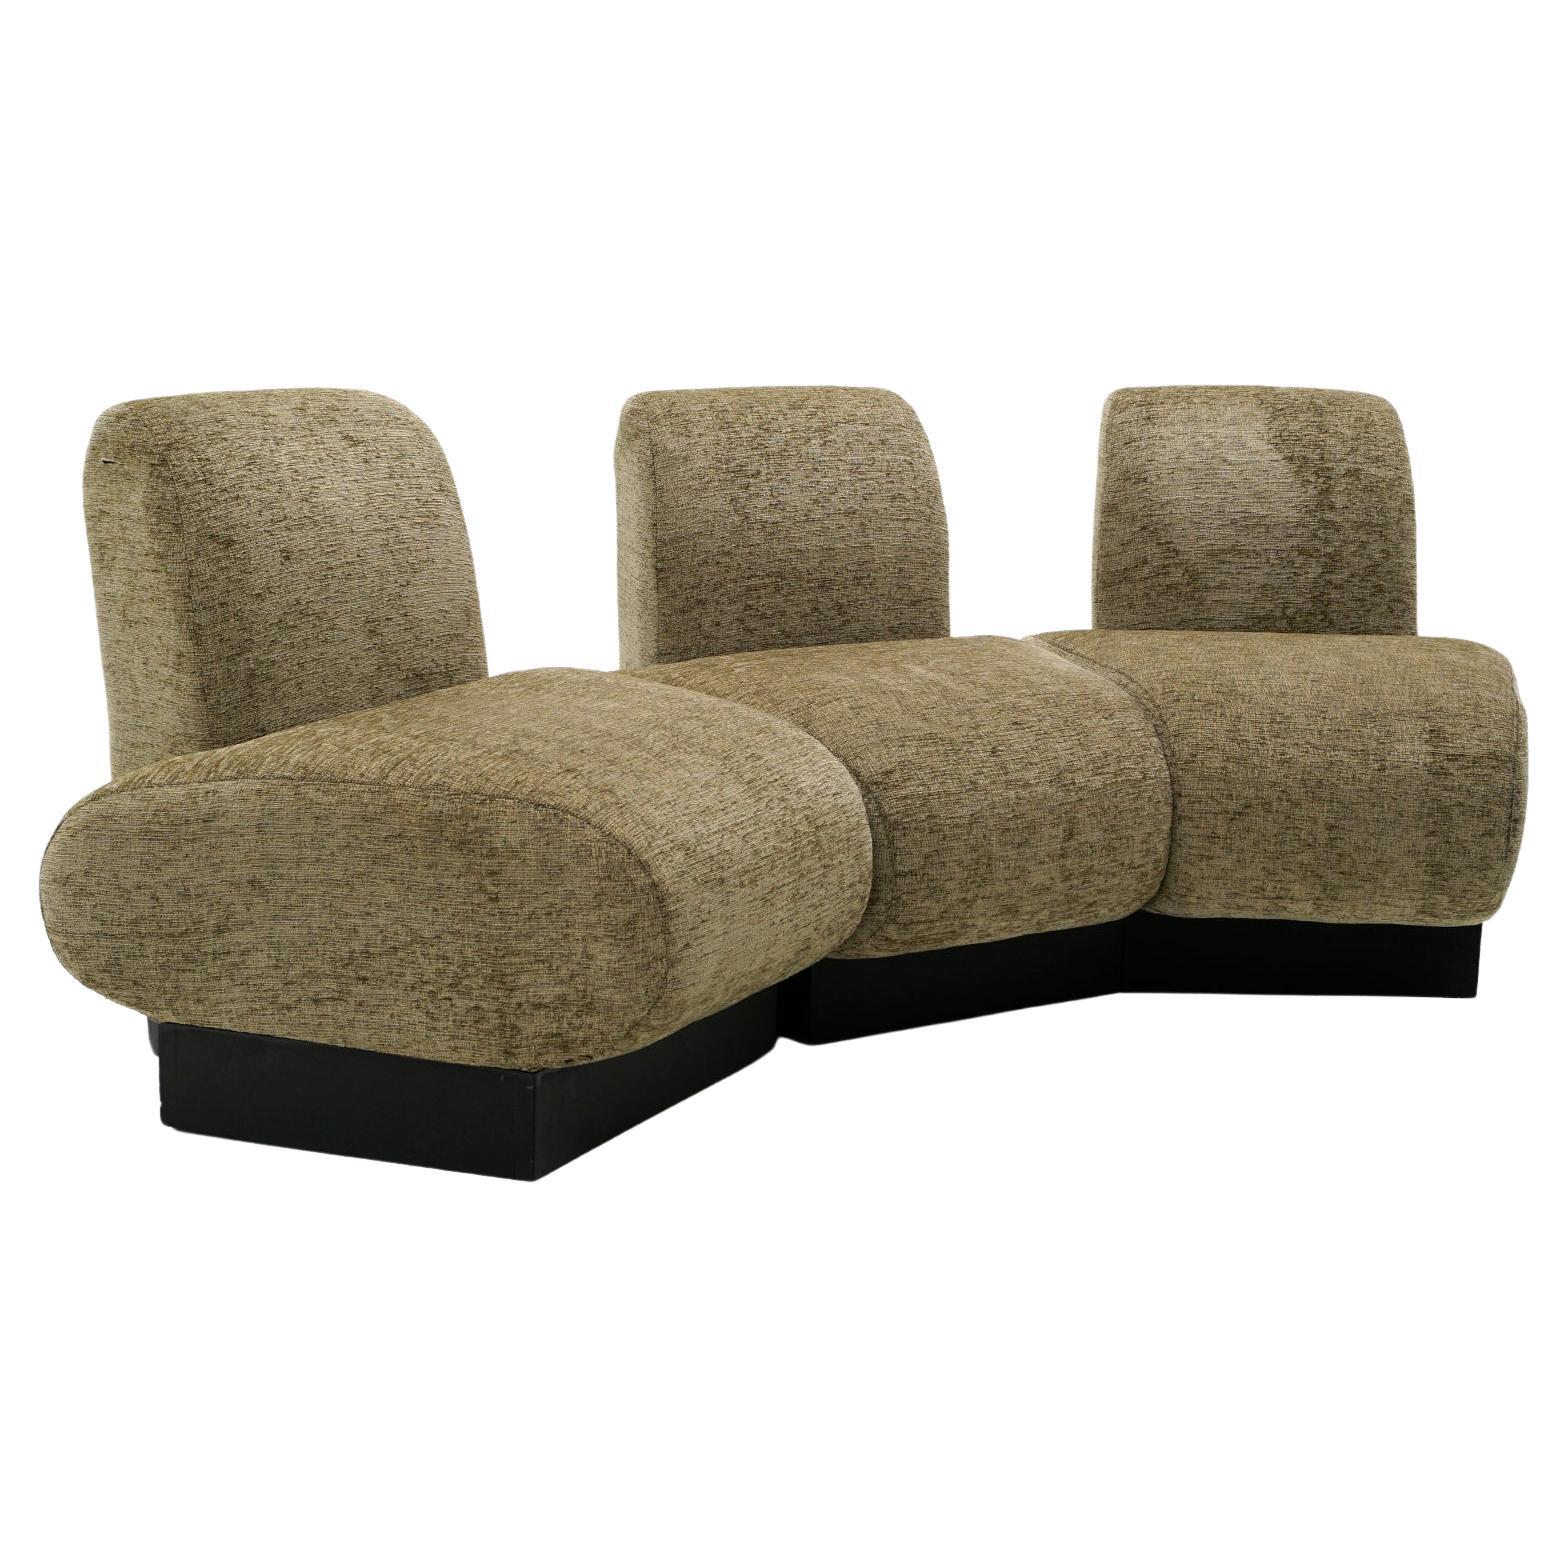 Custom Made Three Seat Curved Sofa.  Separates into Two Pieces. 